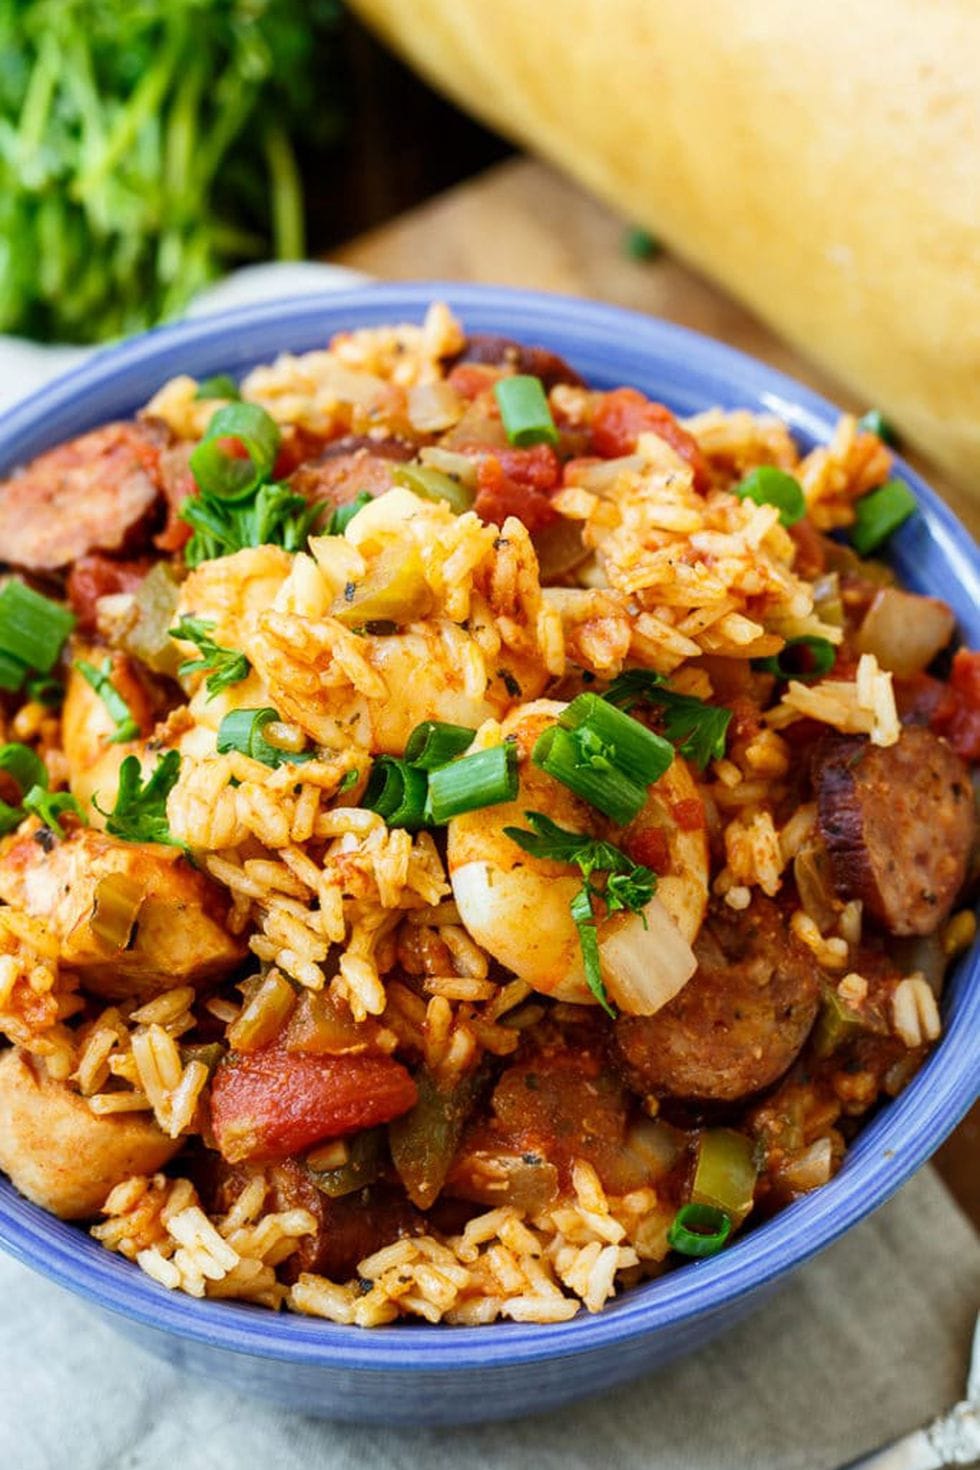 This flavorful jambalaya is included in this article's list of great dinner ideas tonight. Find out what healthy slow cooker recipes you must try today. #mealprep #nutrition #healthyeating #healthyrecipes #healthylife #healthyhabits #healthier #nobake